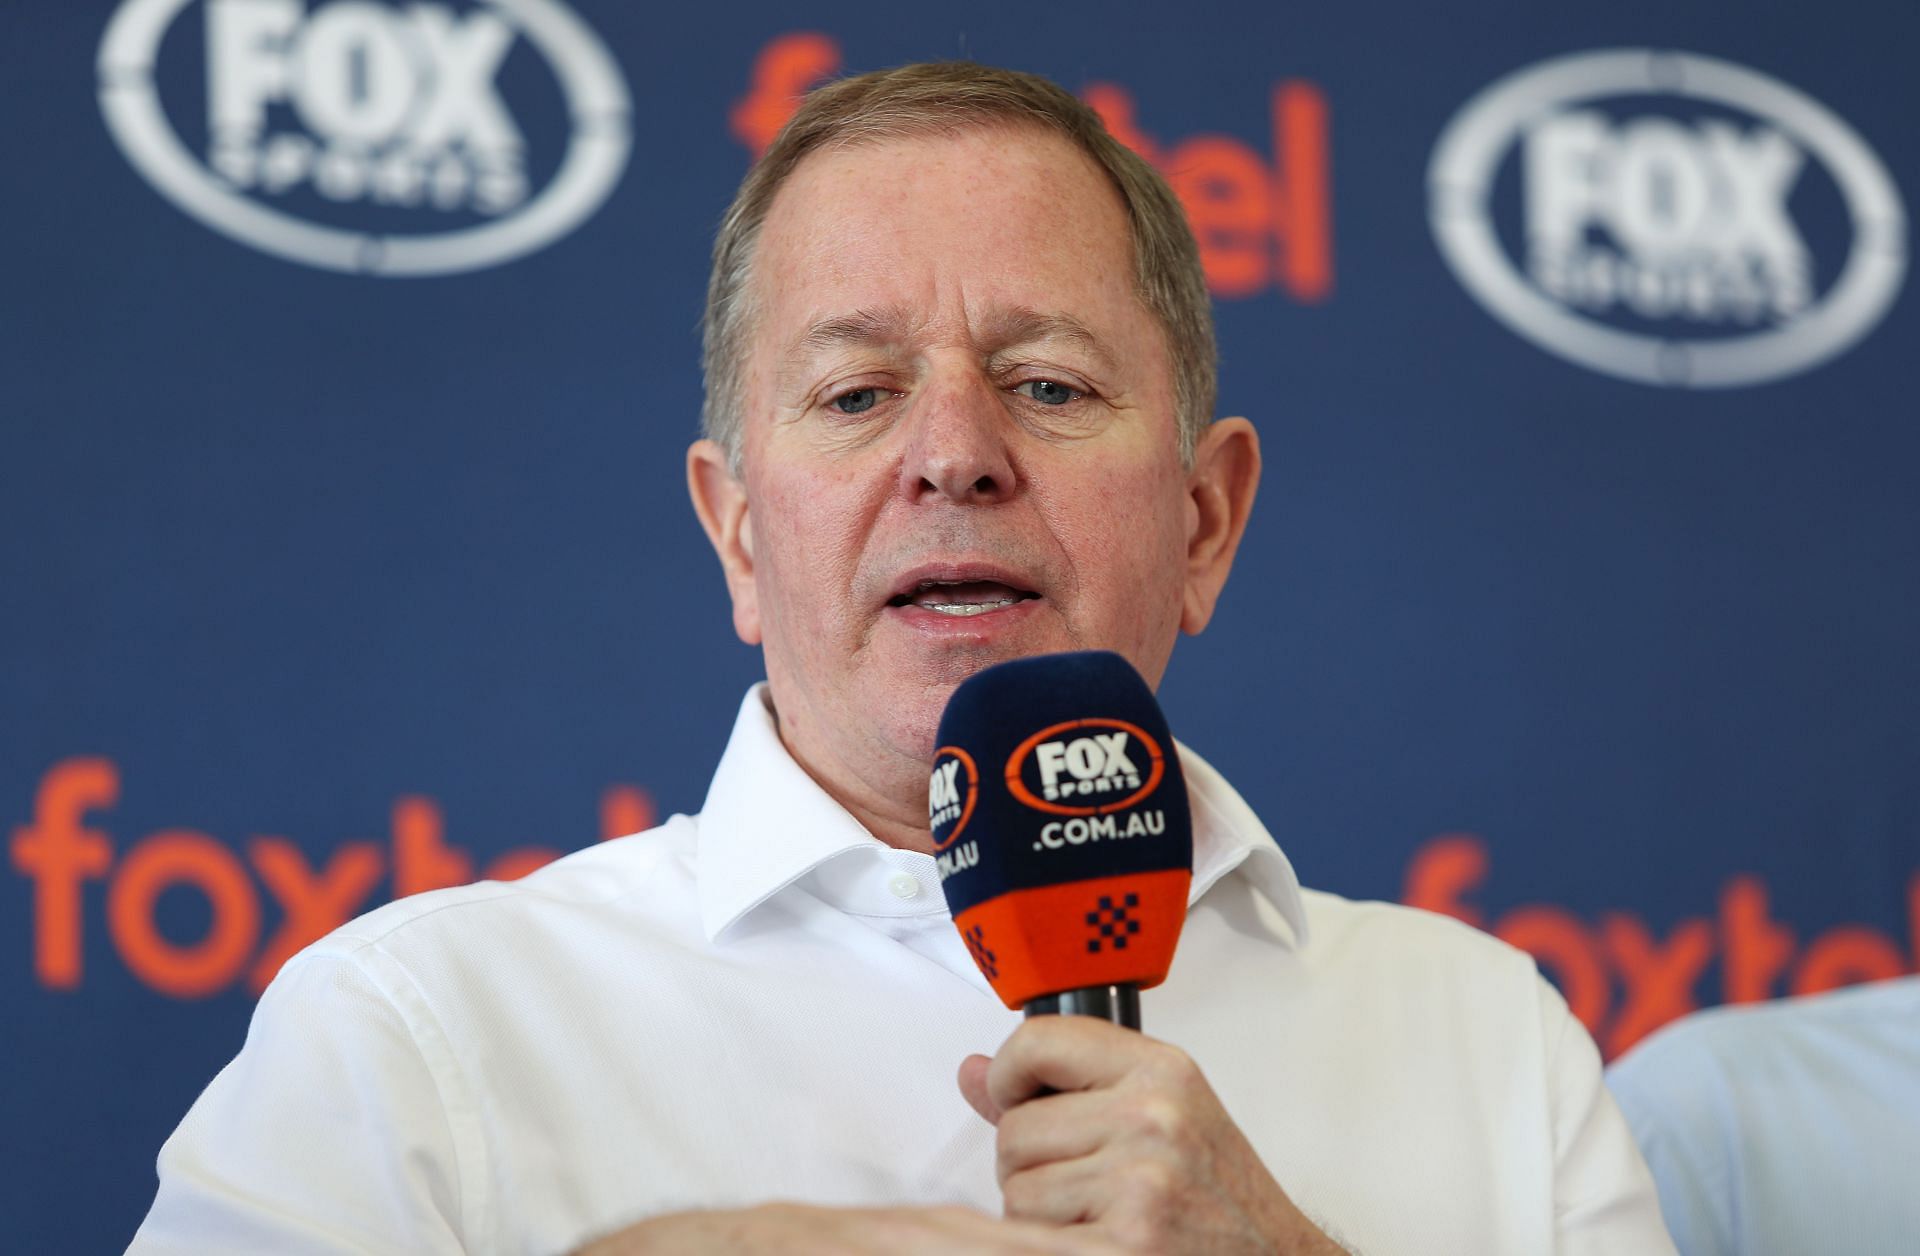 Martin Brundle looks on during a live broadcast during the Fox Sports F1 Commentary Team Melbourne Preview at Albert Park in Melbourne, Australia. (Photo by Jack Thomas/Getty Images for Fox Sports)